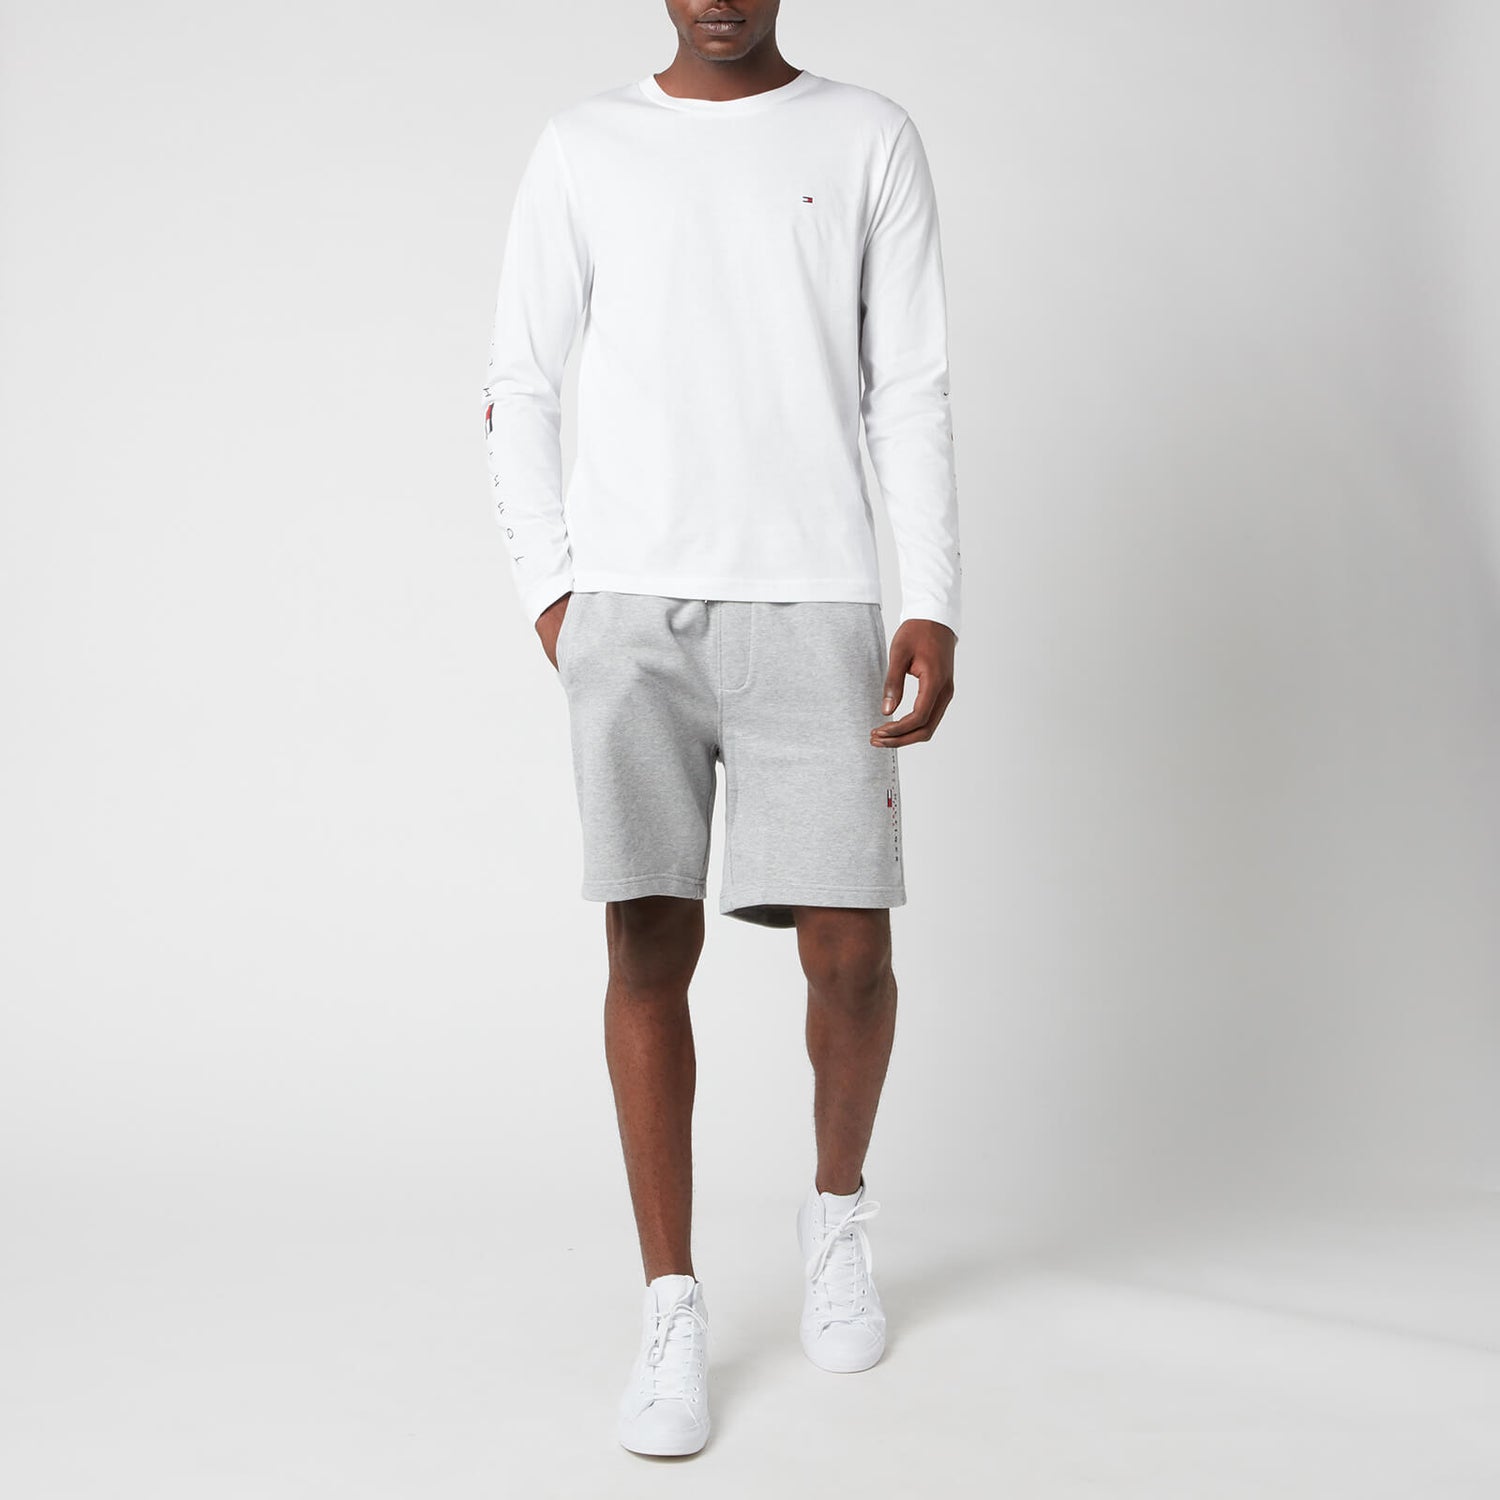 Tommy Hilfiger Men's Essential Long Sleeve T-Shirt - White